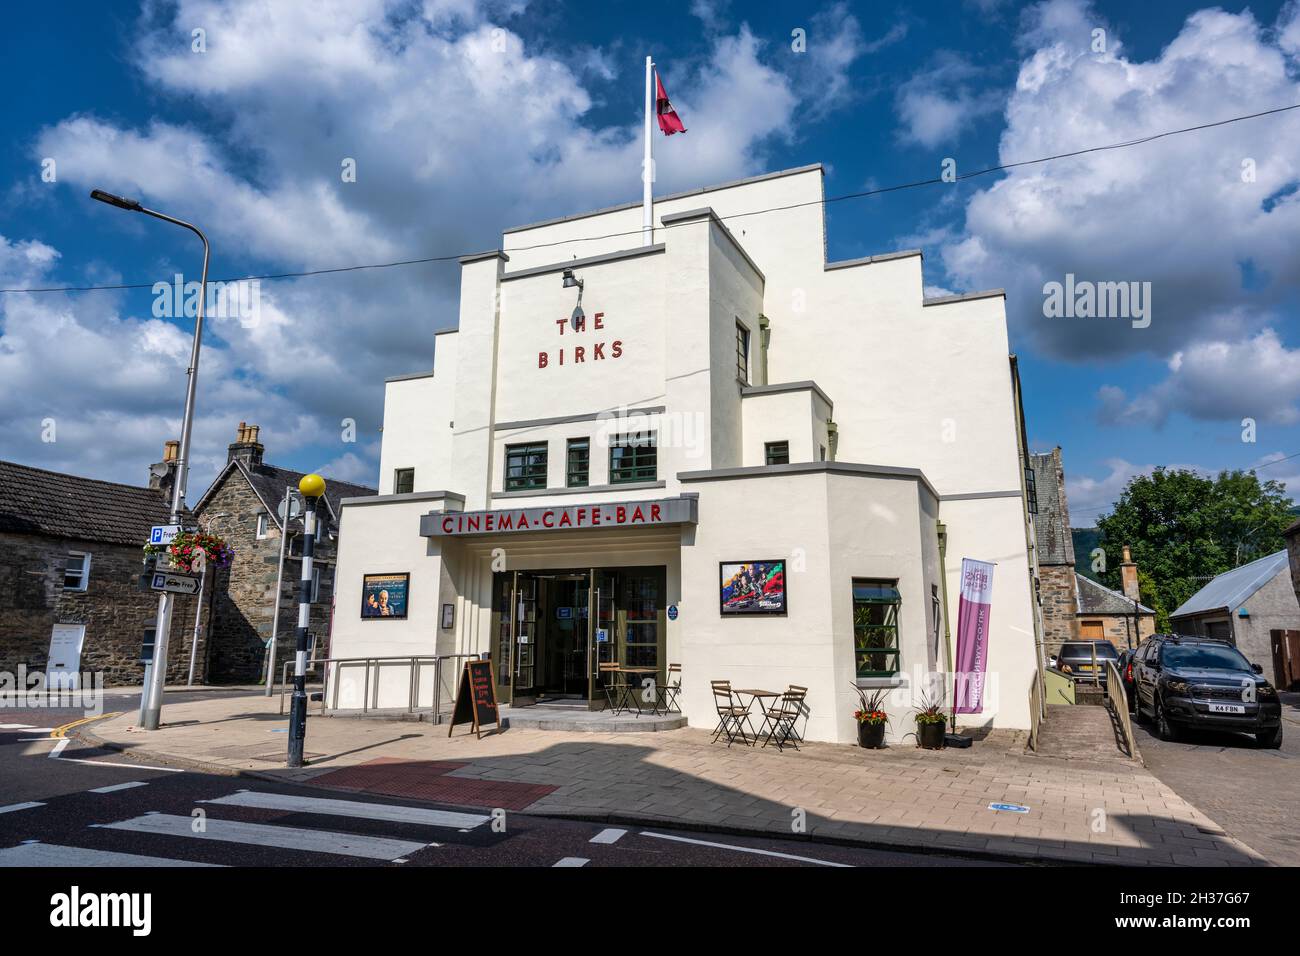 The Birks Cinema and Café Bar, an Art Deco building in the town centre of Aberfeldy, in Highland Perthshire, Scotland, UK Stock Photo